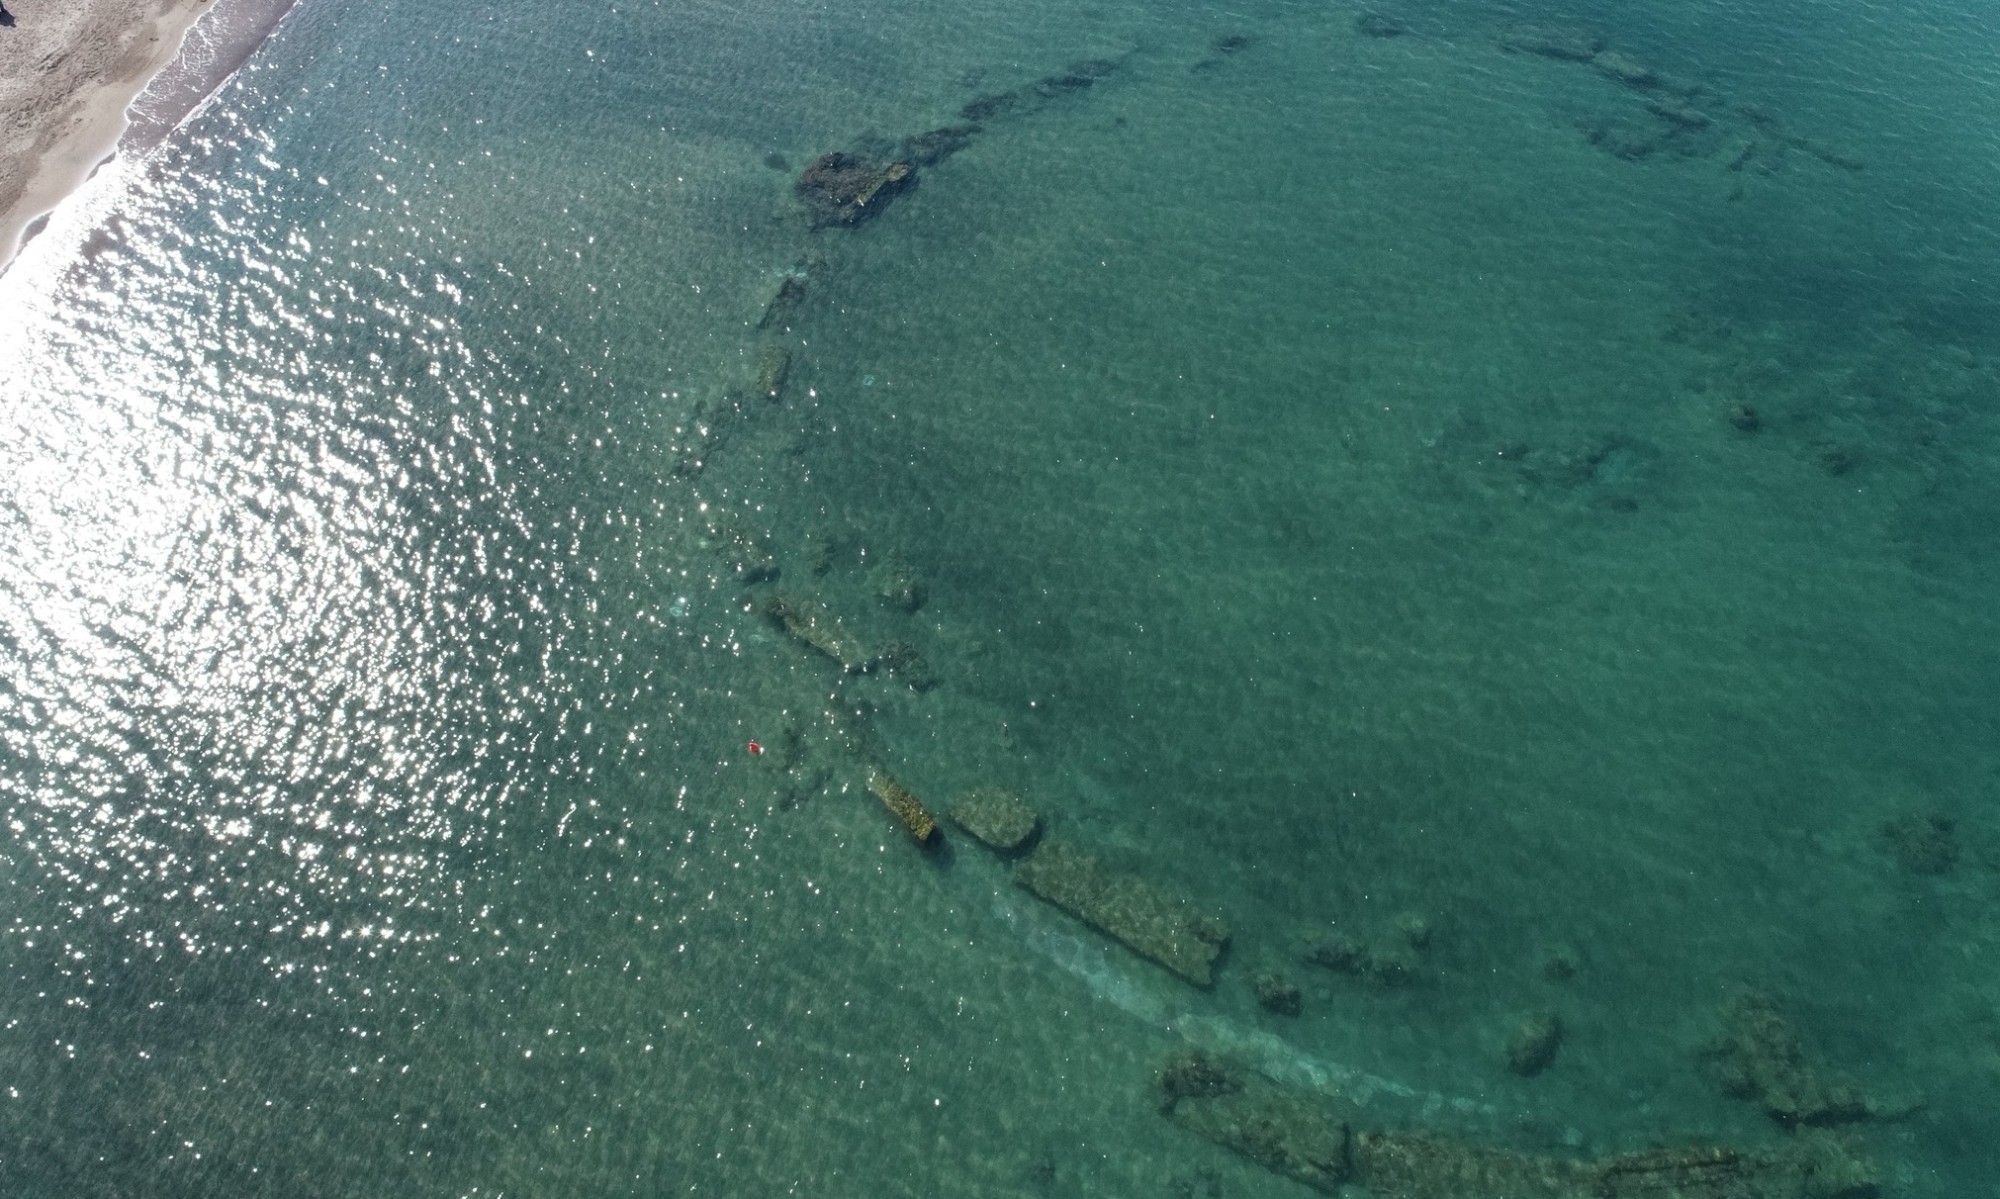 A remarkable Roman-era structure has been discovered underwater off the coast of Cerveteri, Italy. This ancient site, located in Campo di Mare, offers a fascinating glimpse into the luxurious lifestyles of Roman aristocracy and the advanced construction techniques of the time. Underwater restoration and enhancement work was recently completed to preserve this historical treasure.